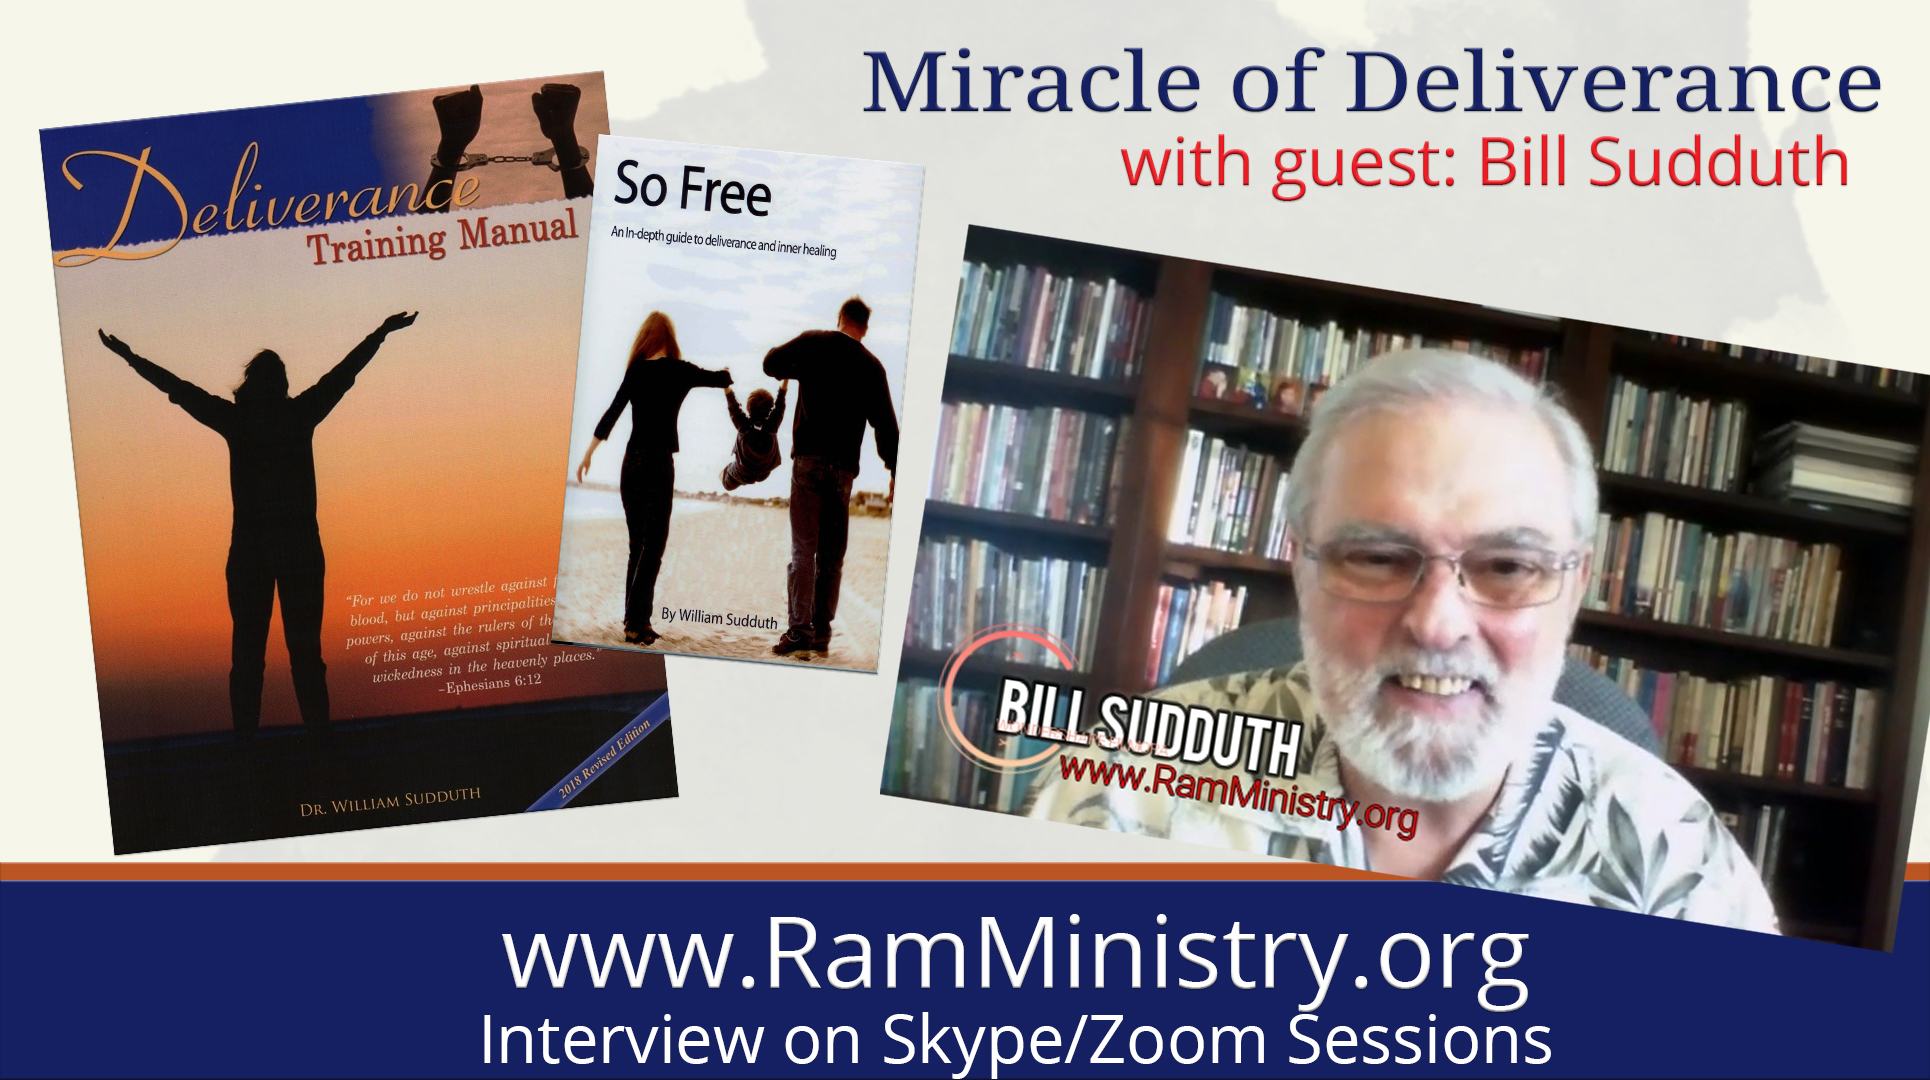 Q&A with Bill Sudduth on Deliverance Ministry